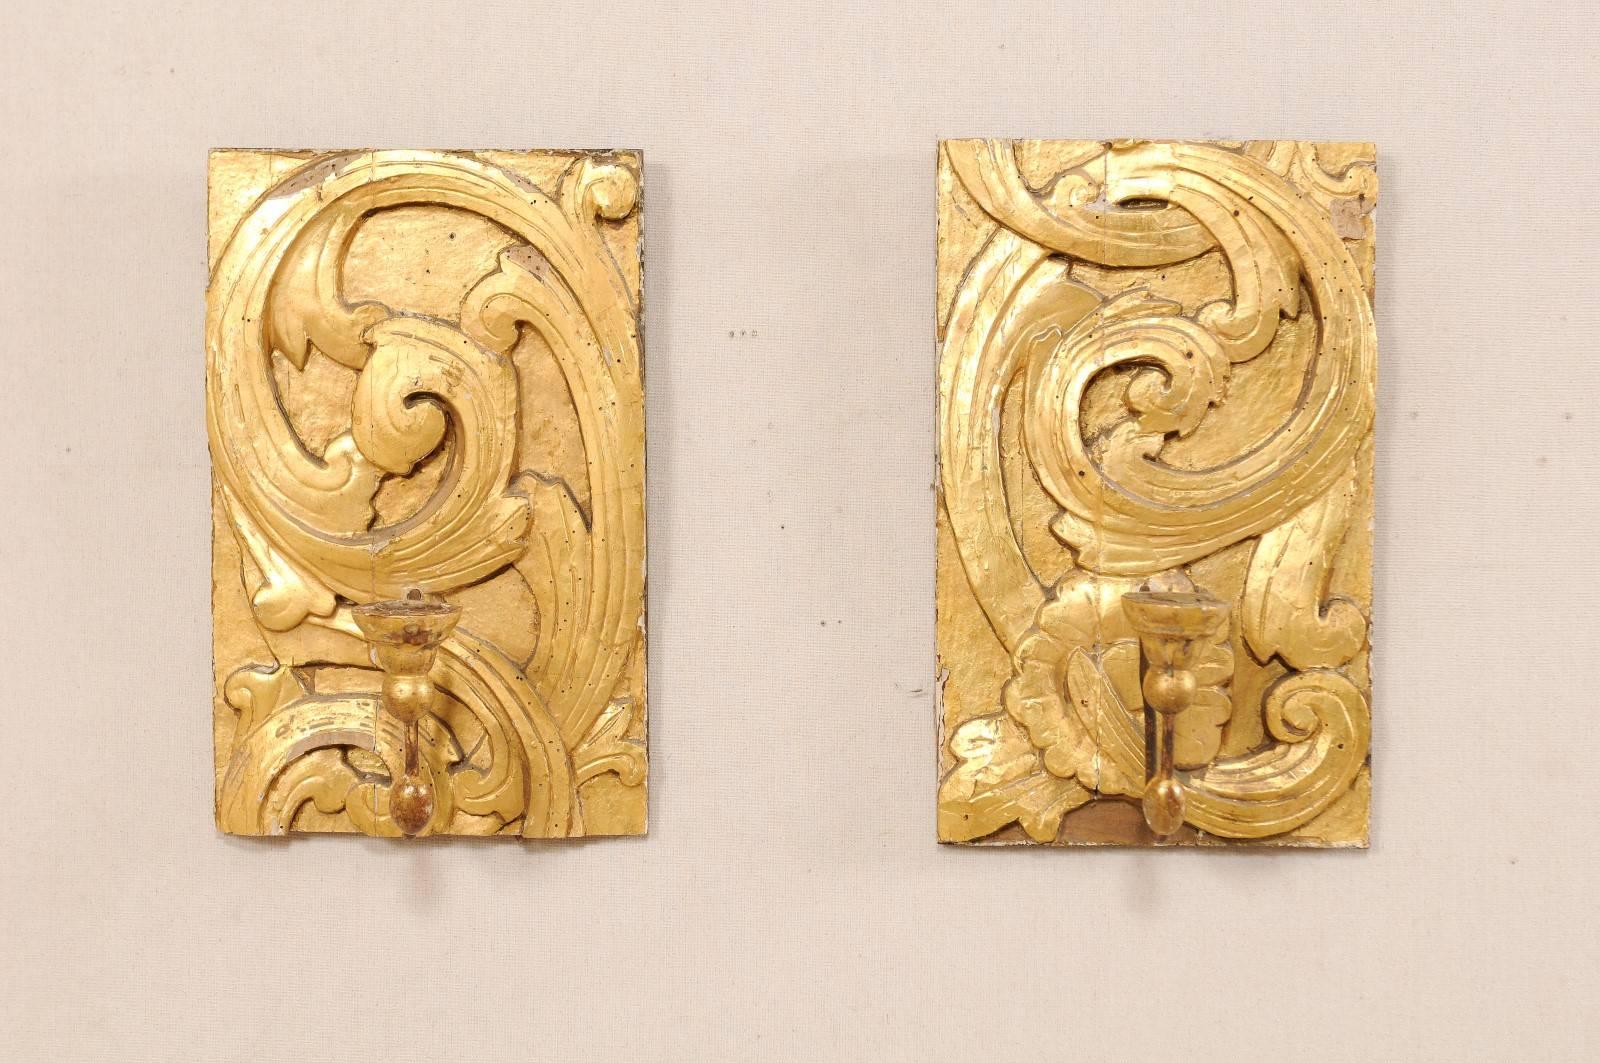 A pair of Italian 19th century gilded fragment sconces. This pair of Italian candle sconces, from the 19th century, feature gilt and gesso over carved wood. The carved wood back plates feature a scrolled acanthus leave motif. Each sconce has a